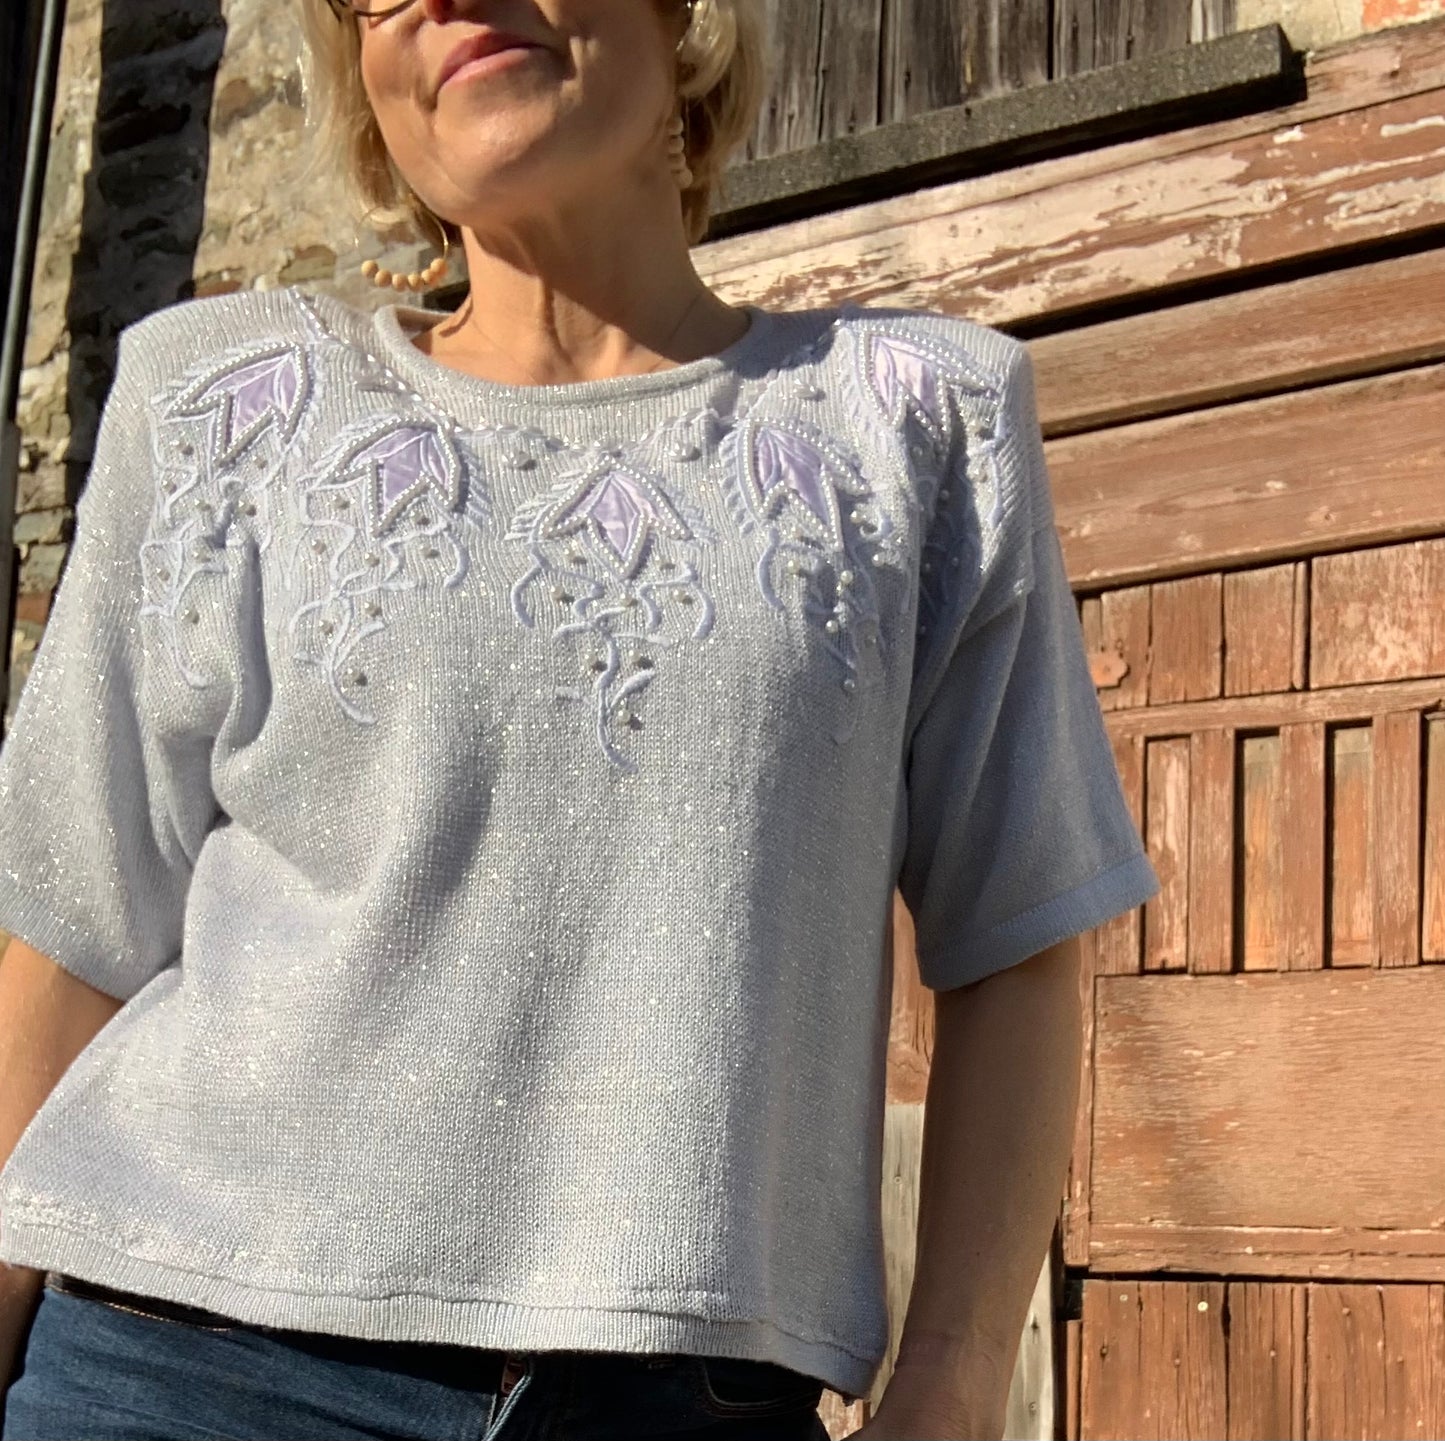 Vintage 1980’s silver knitted appliqué & beaded top